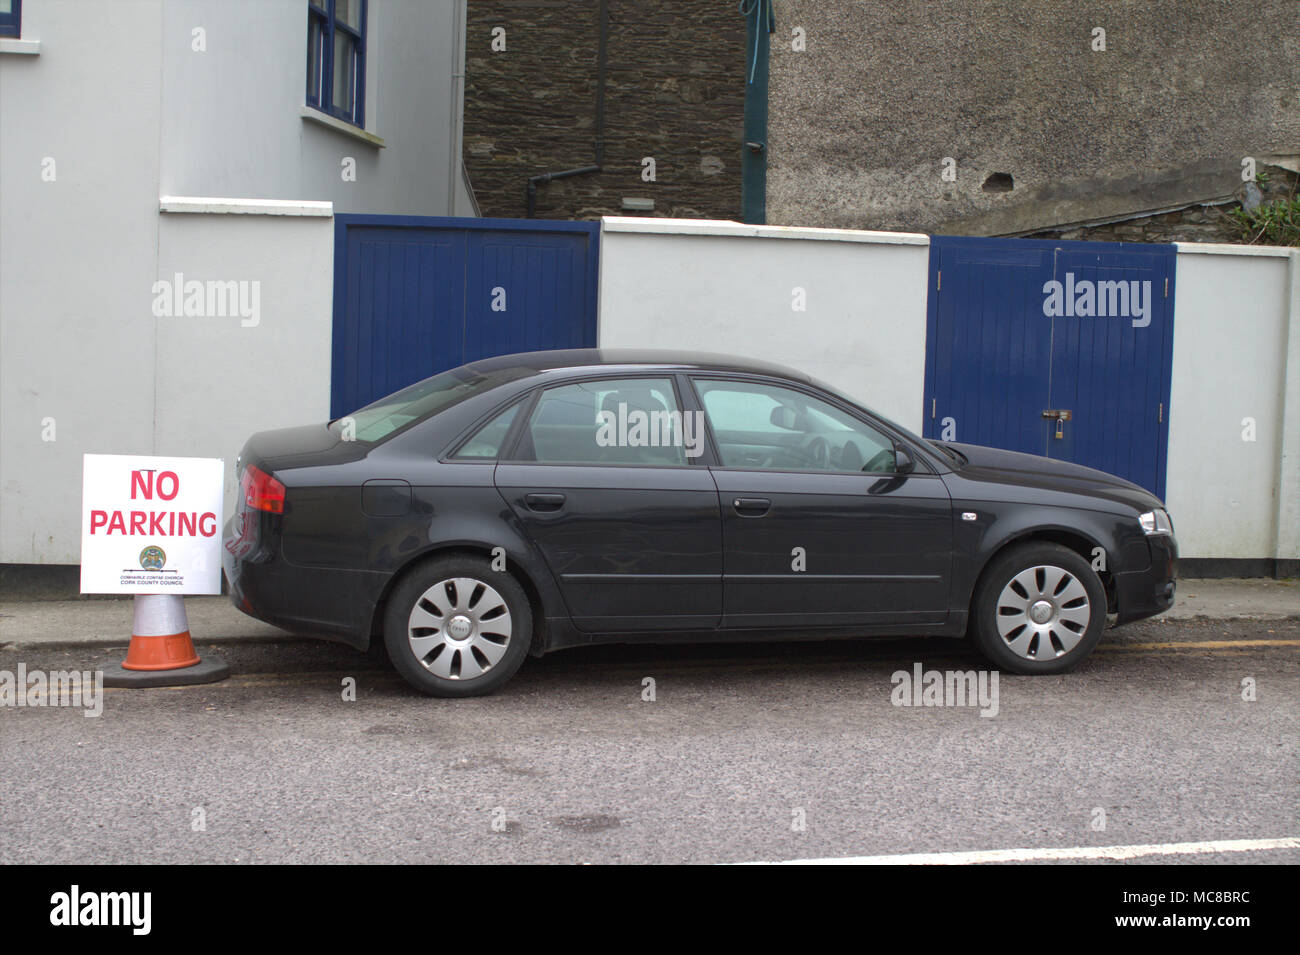 car ignoring a no parking sign and blocking a gateway, restricting access to the property or building, and blocking the footpath, sidewalk. Stock Photo